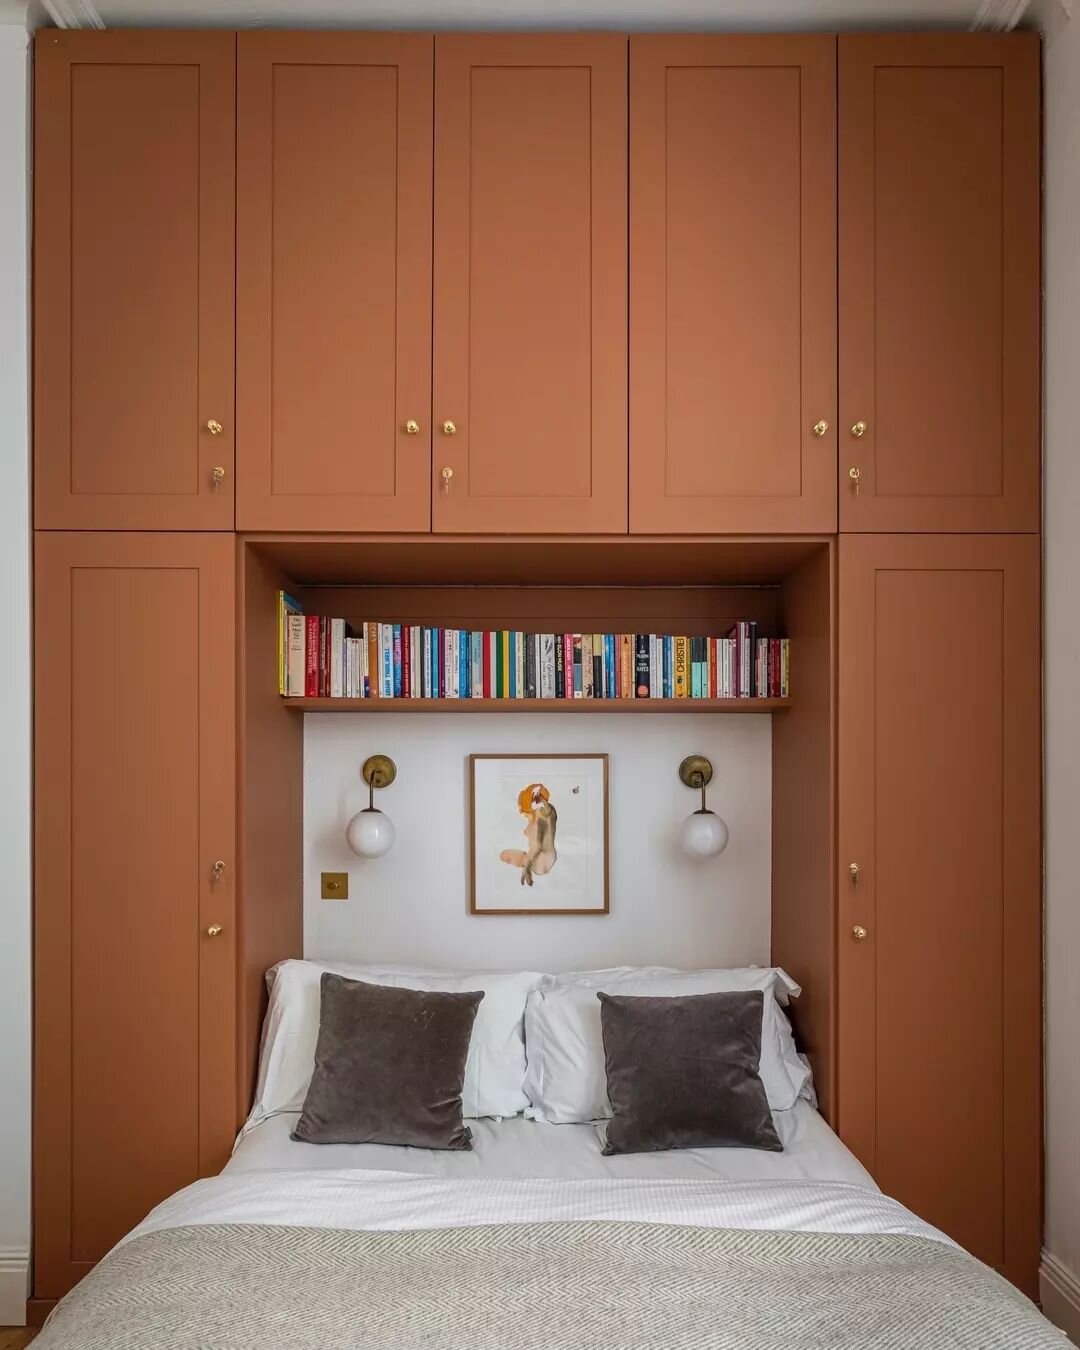 This custom designed wardrobe shows the value of clever storage solutions. We opted for a beautiful terracotta colour for the joinery which compliments the dainty brass accents throughout. 🤩